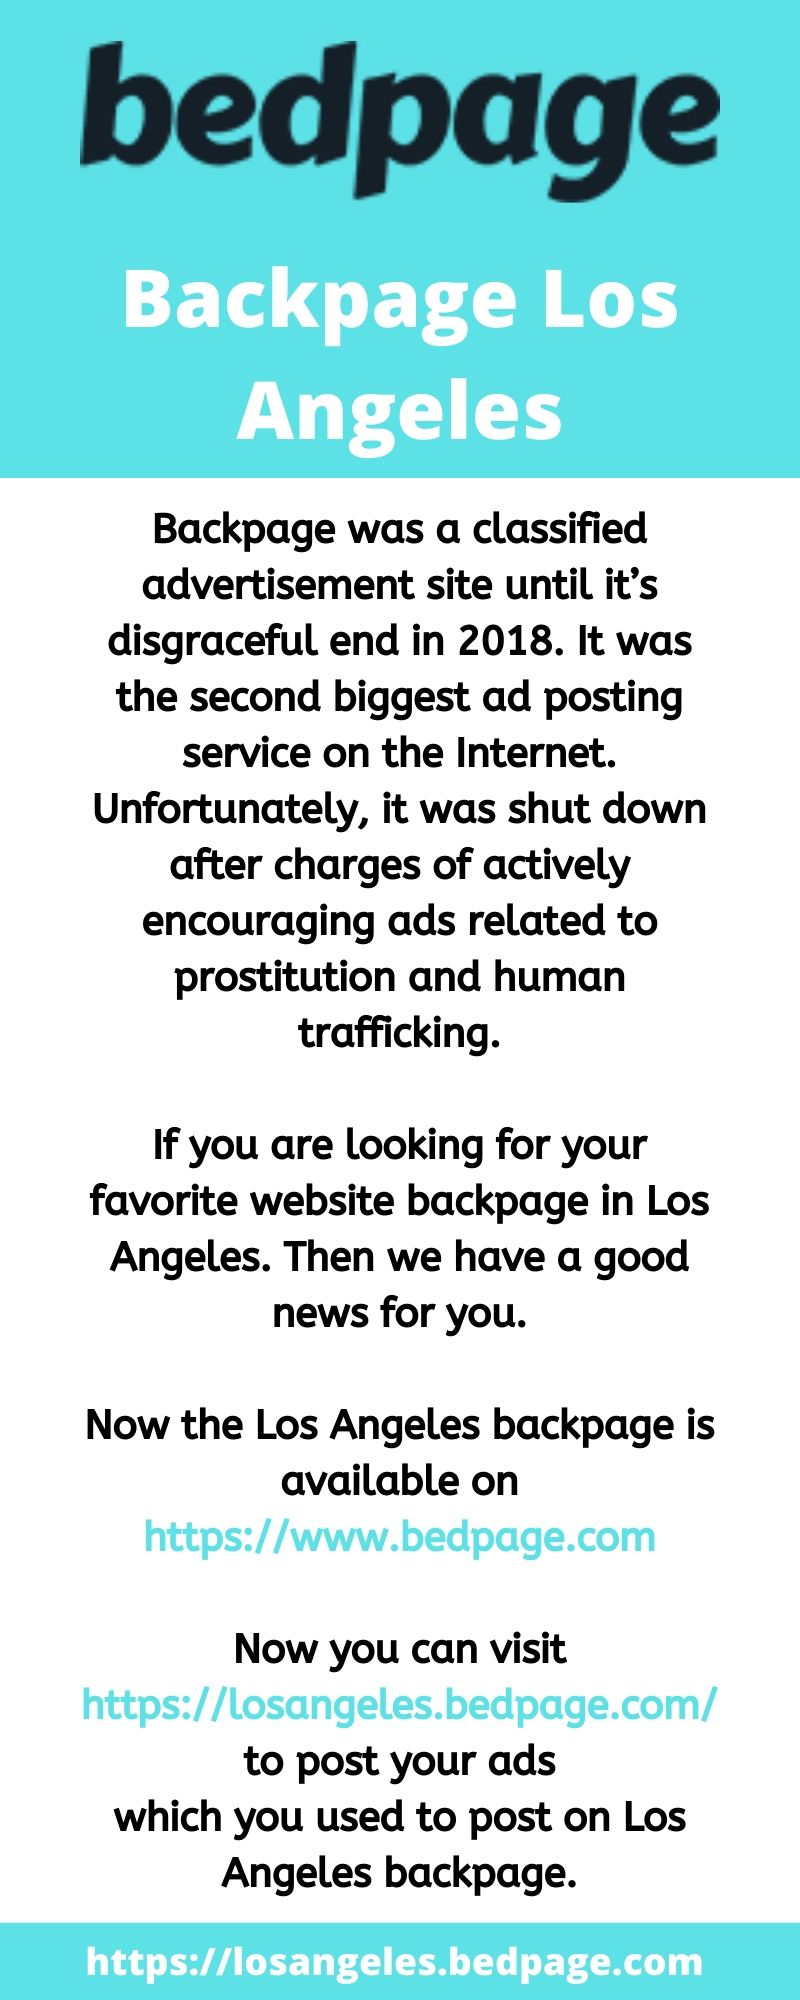 amanda ayr recommends backpage of los angeles pic